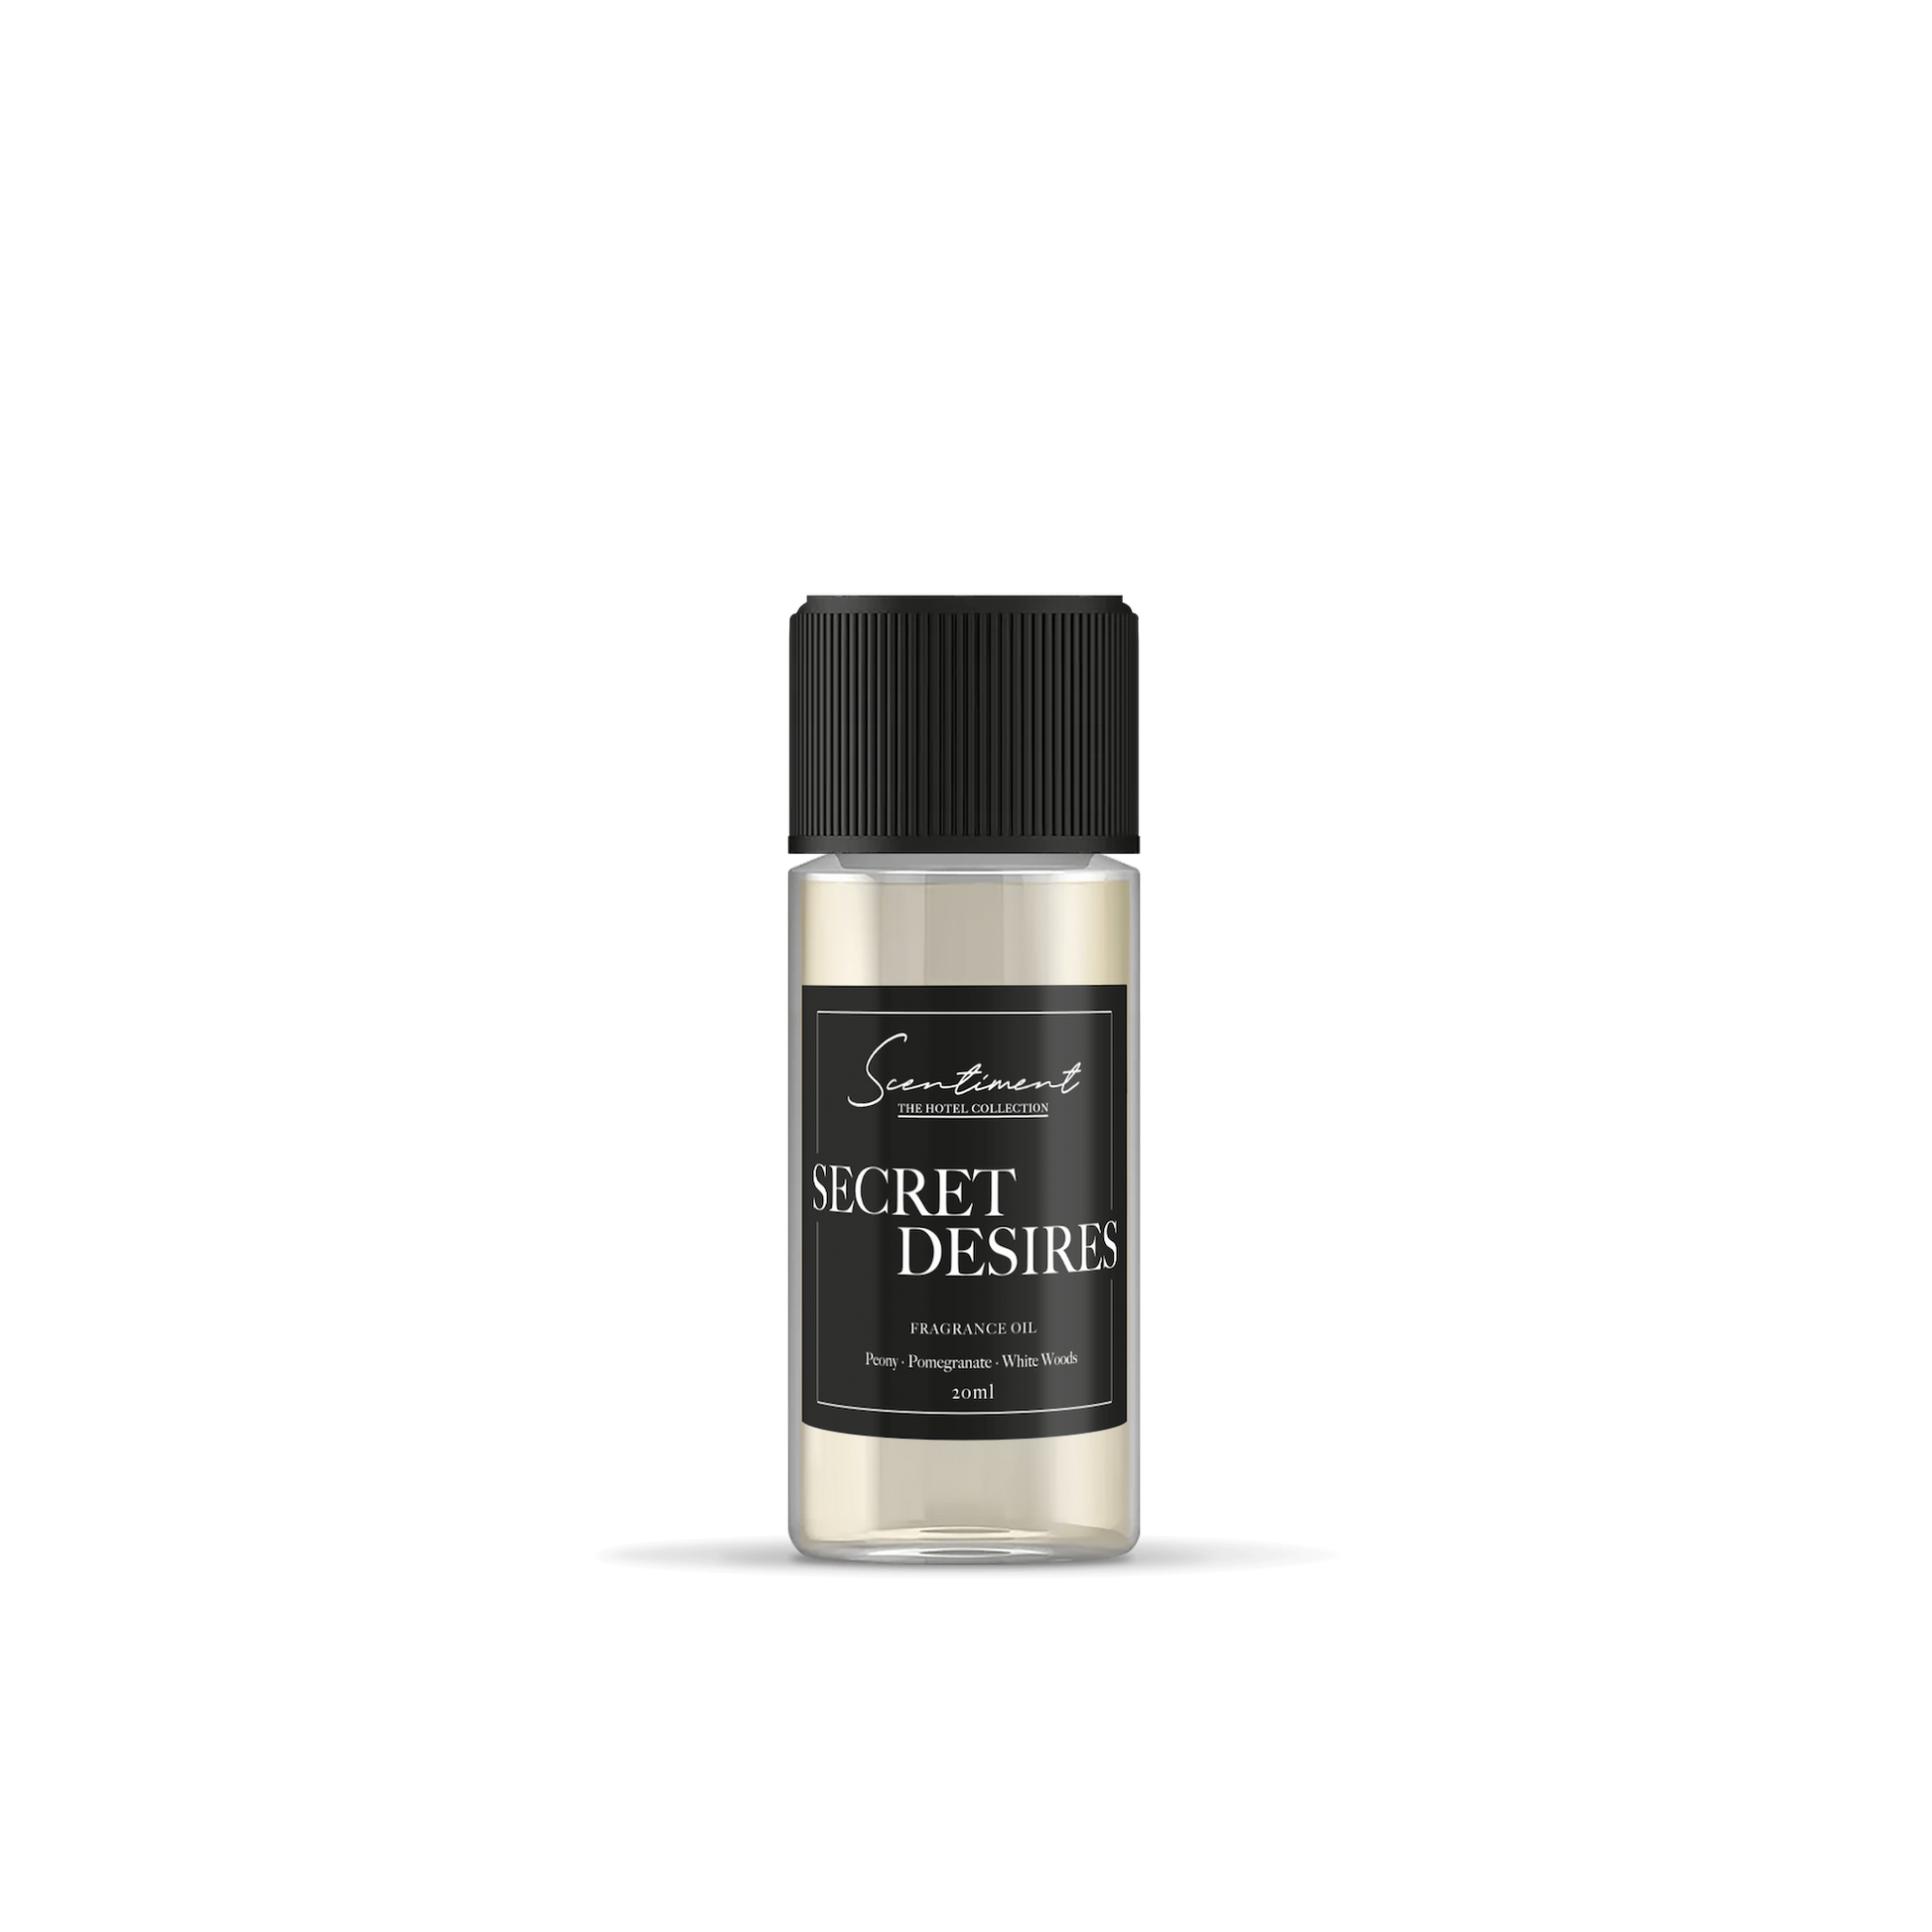 Secret Desires Fragrance Oil, inspired by ARIA® LAs Vegas, with notes of Peony, Pomegranate, and White Woods.